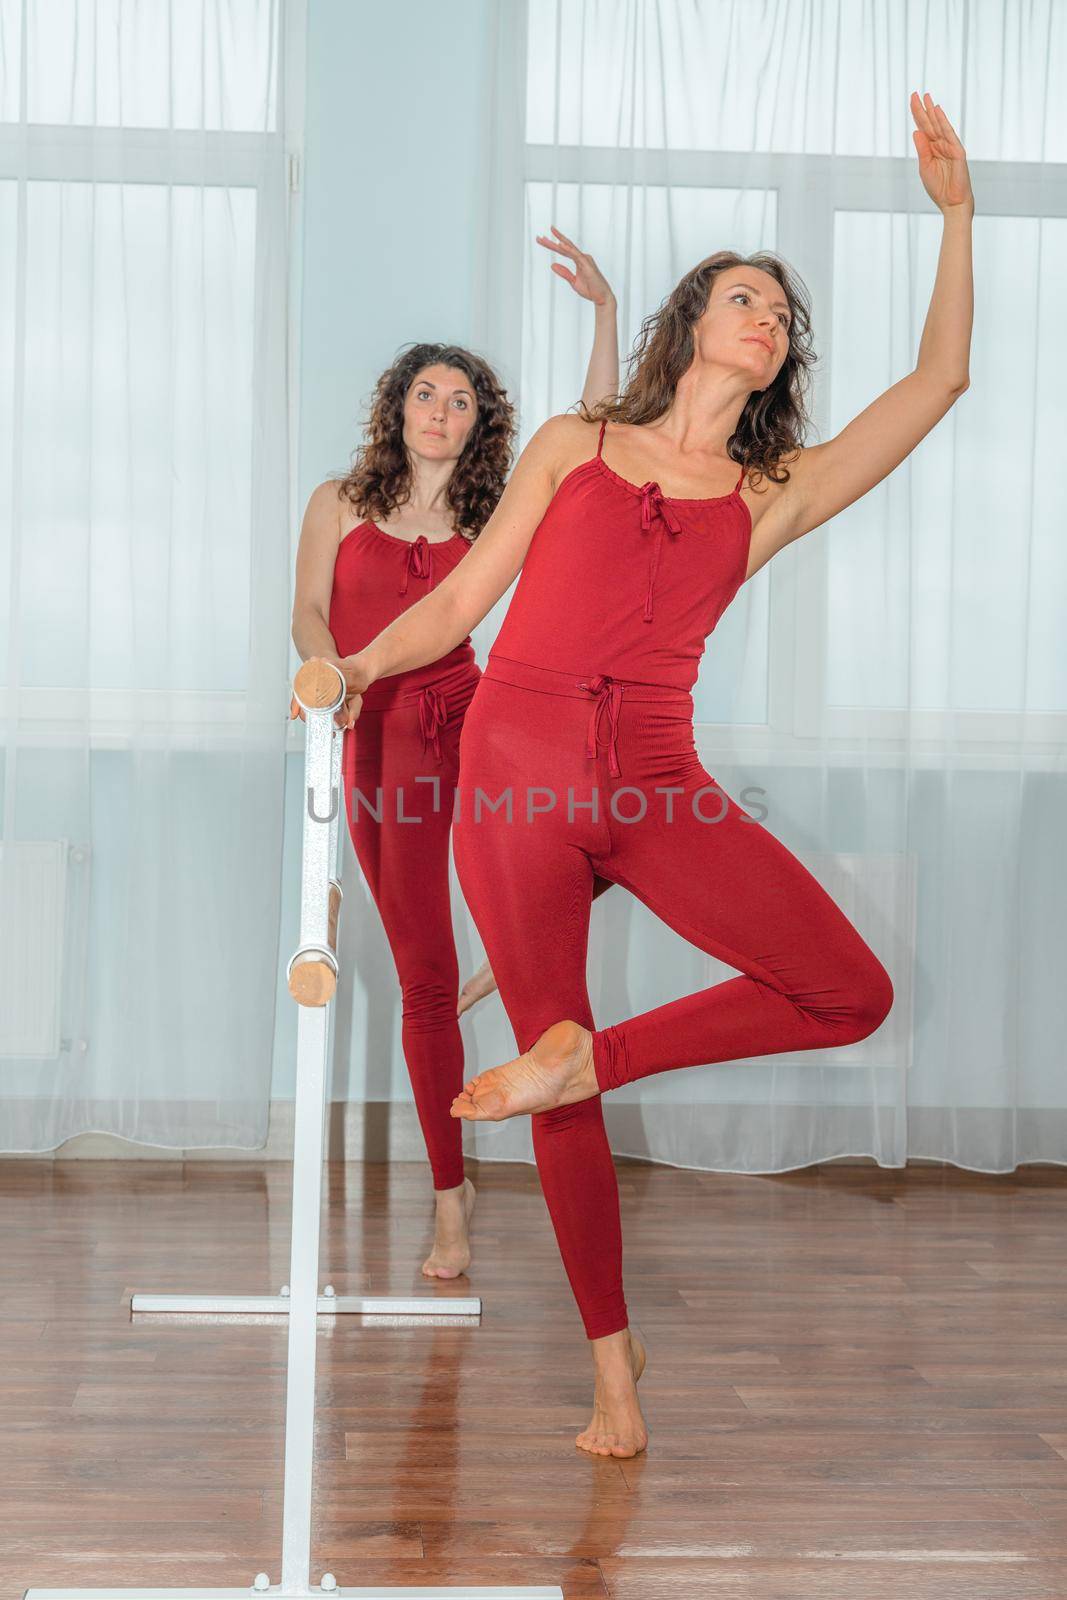 I train with a friend. Two young women train together in a bright training room near a choreographic machine